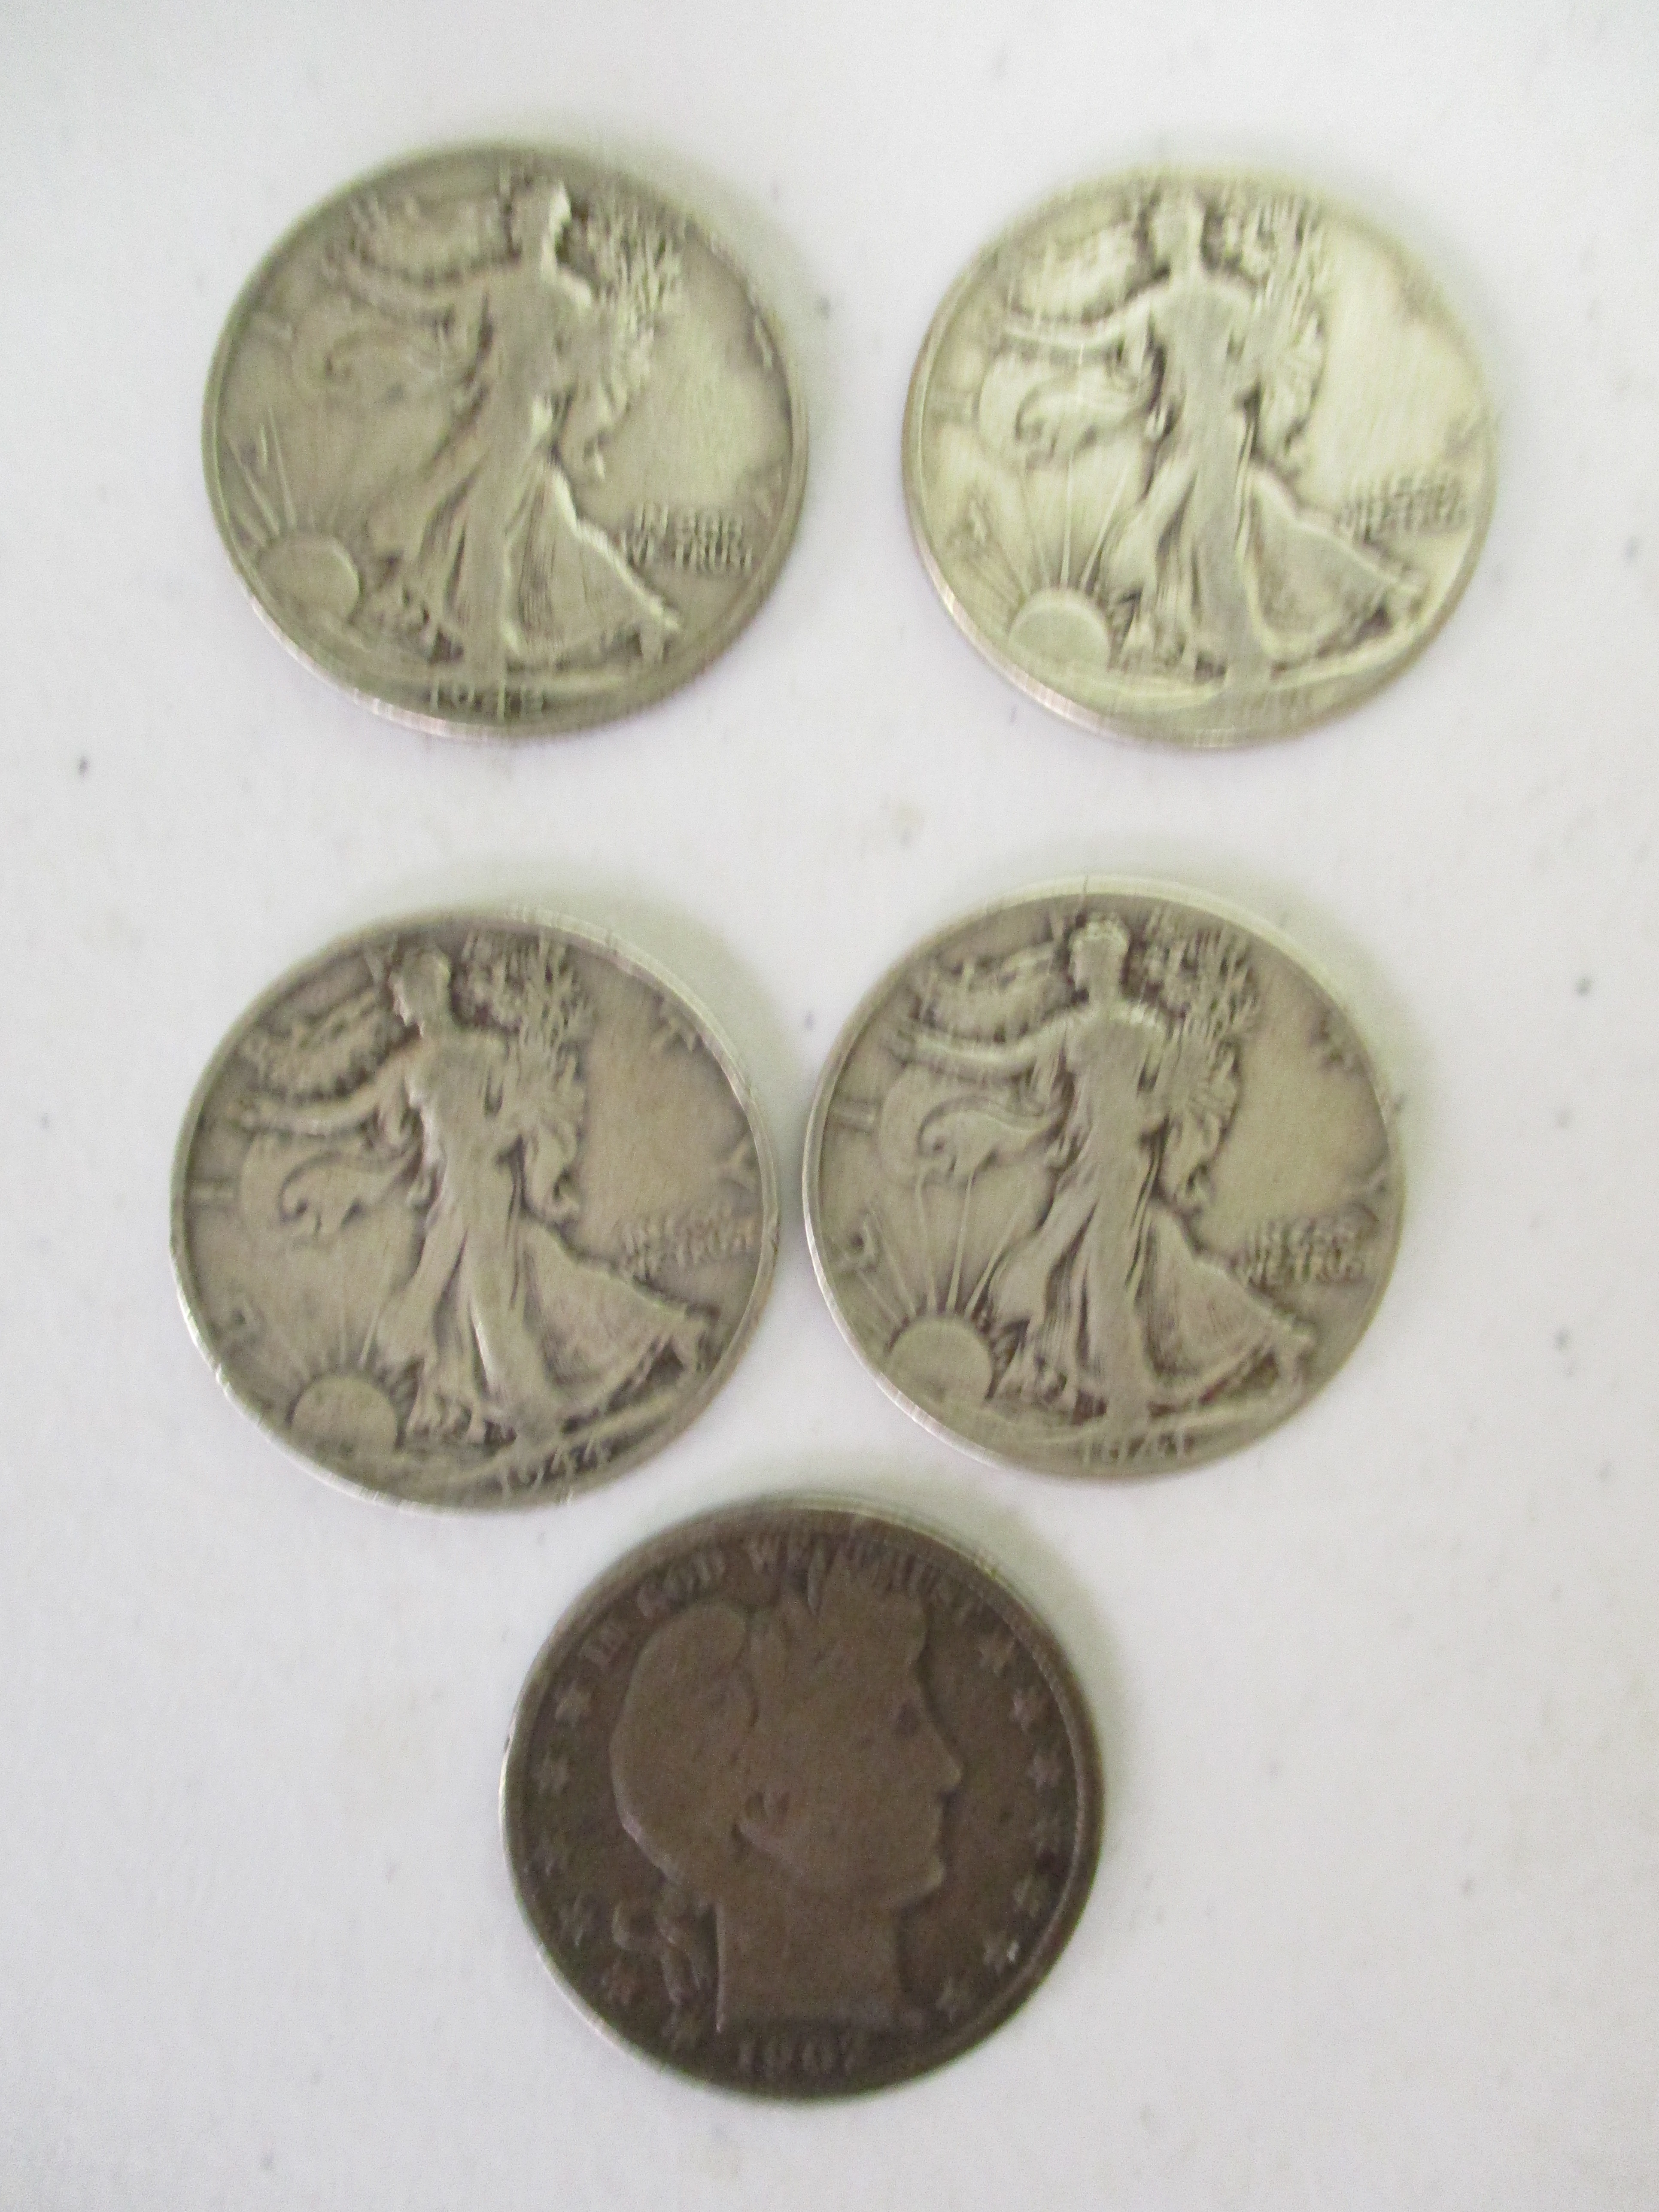 Lot 27: (4) Walking 1/2 Dollars And (1) Barbar 1/2 Dollar (by The Piece, Take 5)